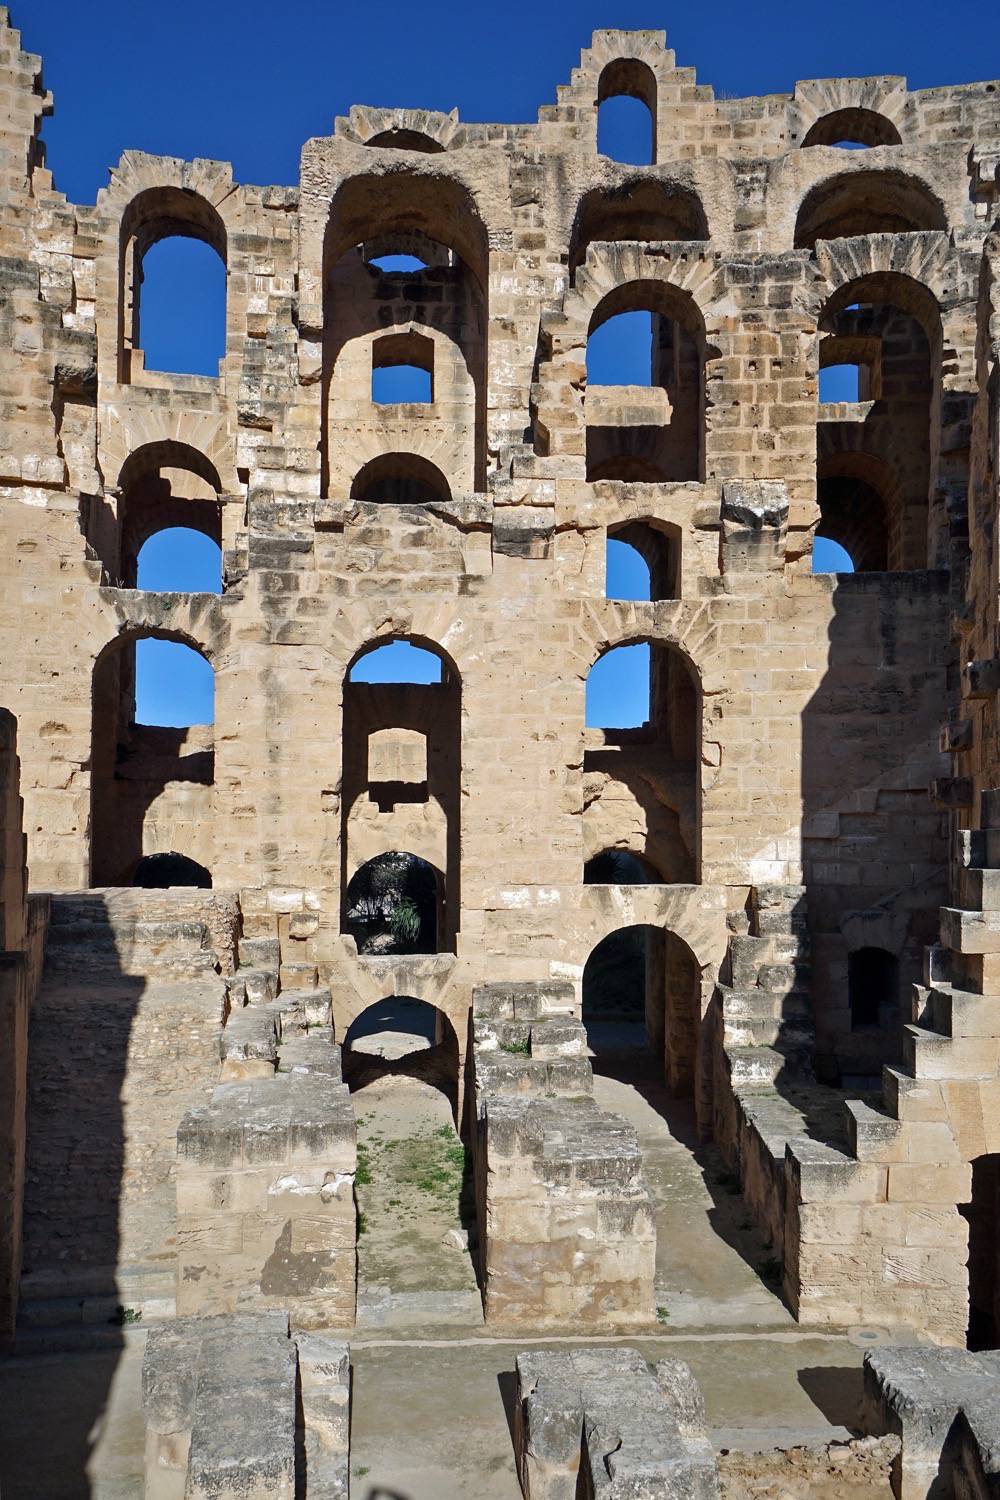 Interior view. View of pillars and arcades at the eastern side of the amphitheater.